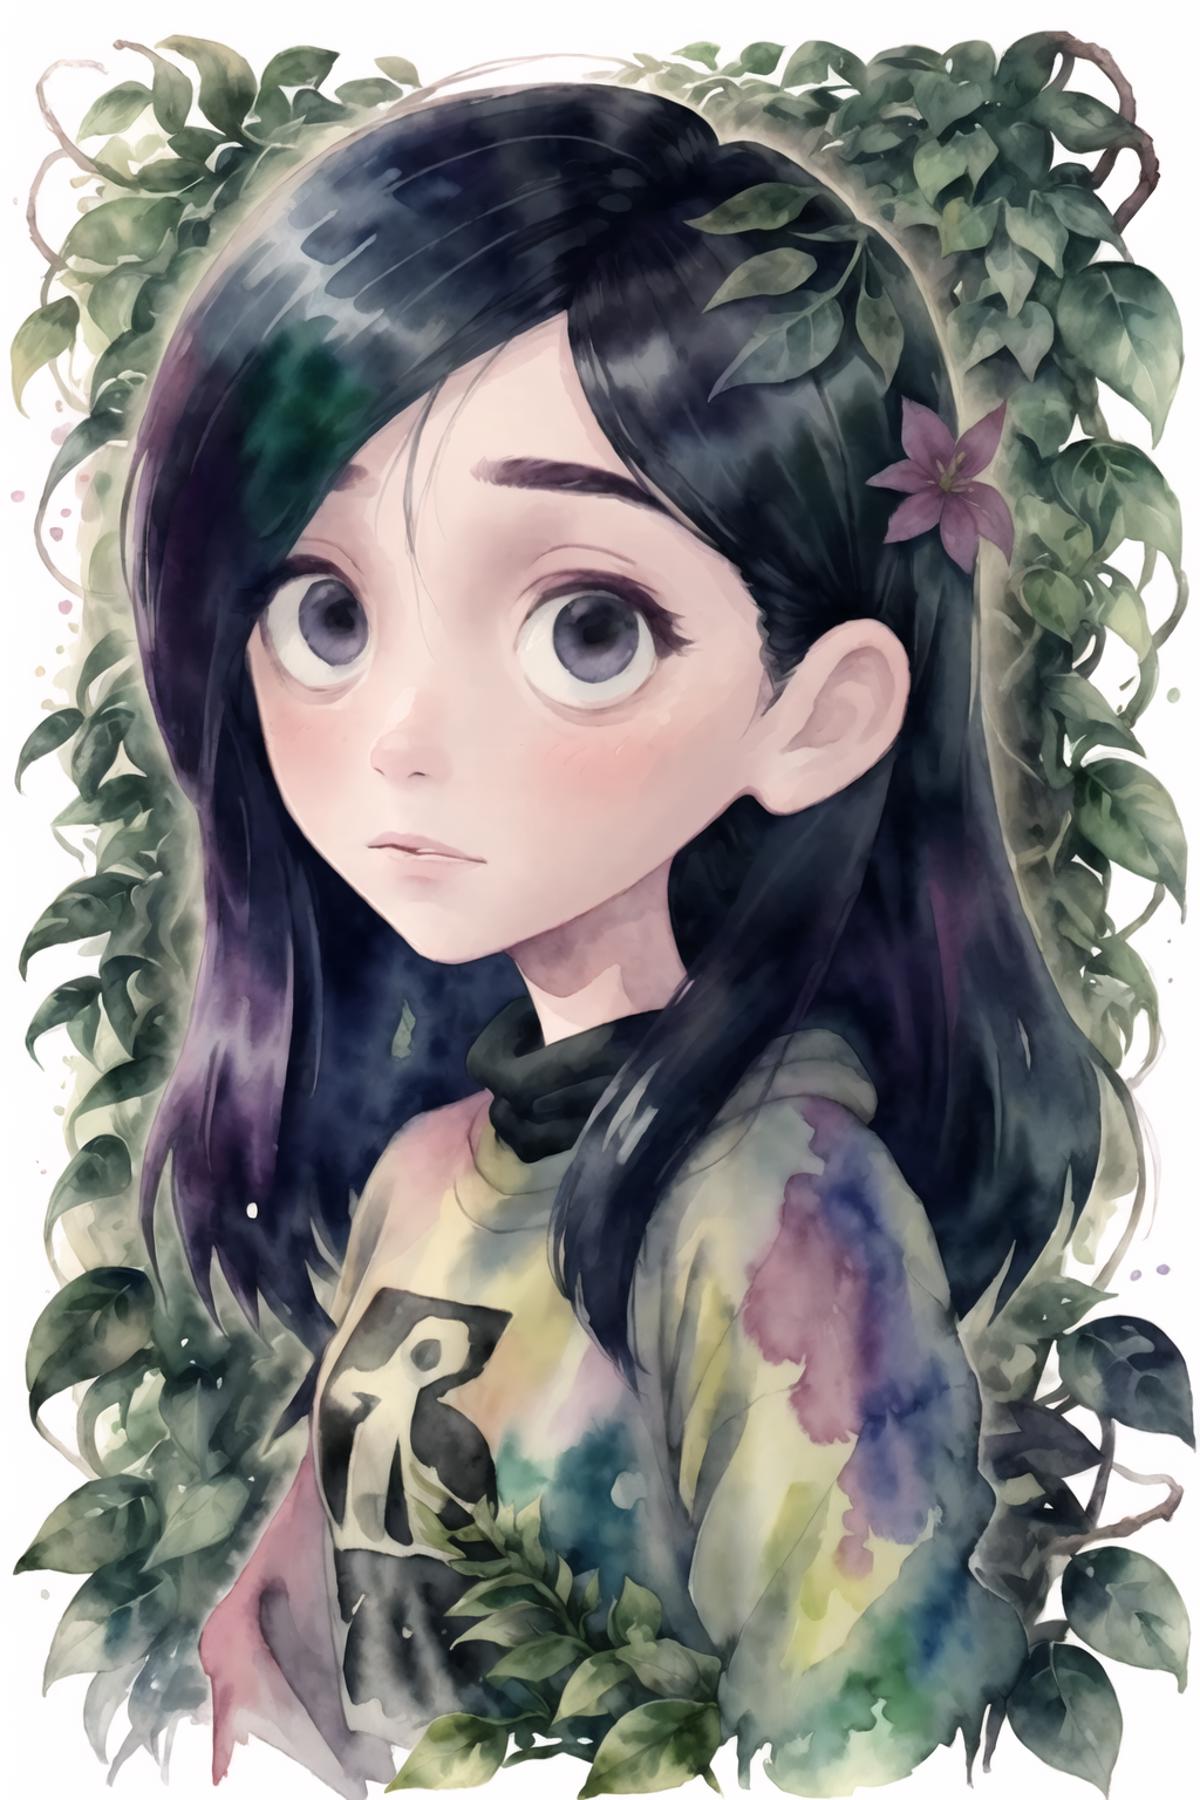 Better Watercolor painting - In the style of Iris Compiet image by NostalgiaForever